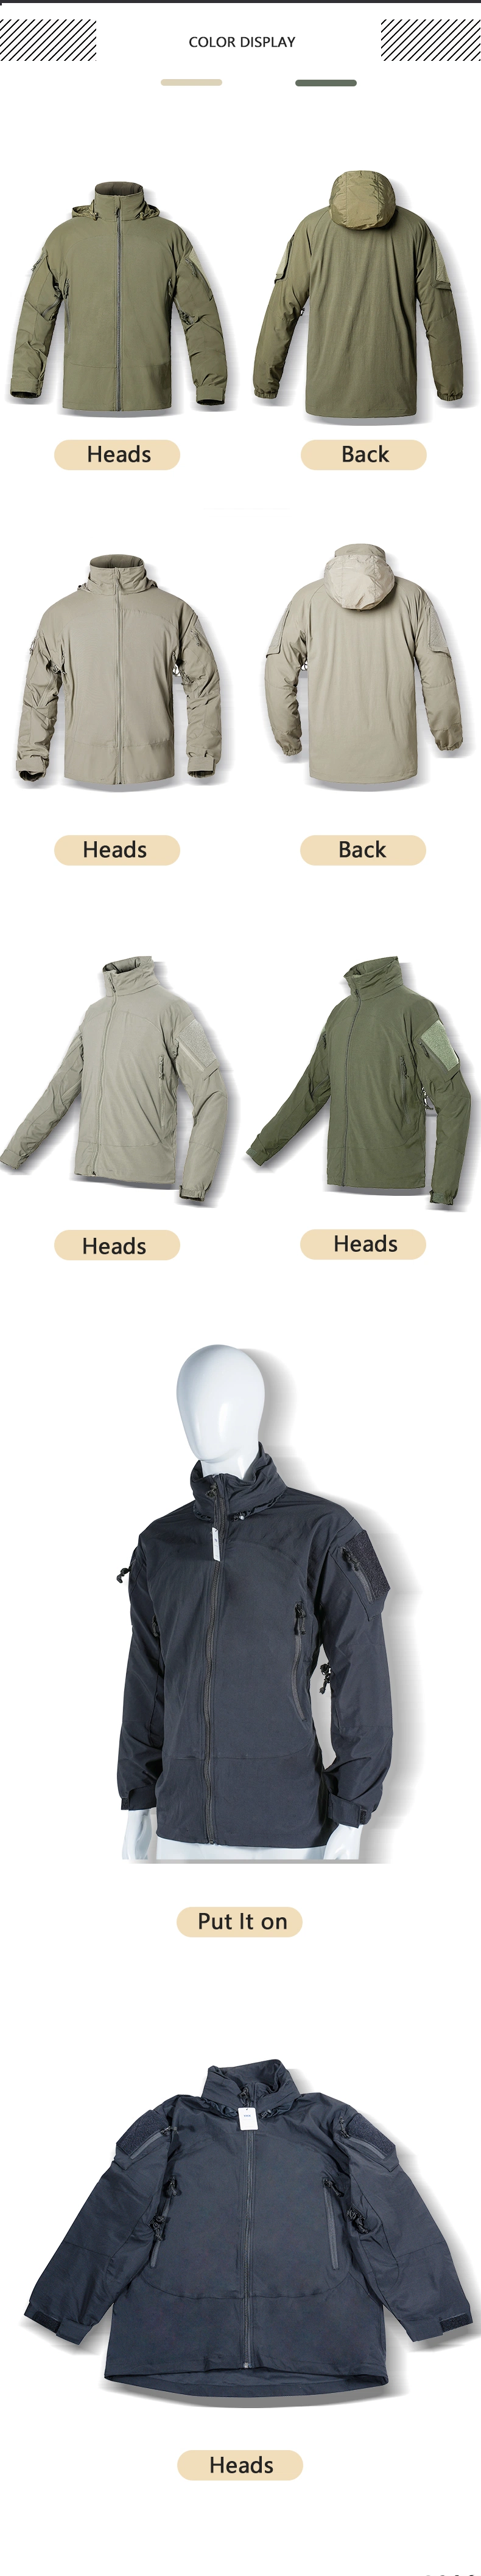 Personalized L5 Clothing for Outdoor Activities